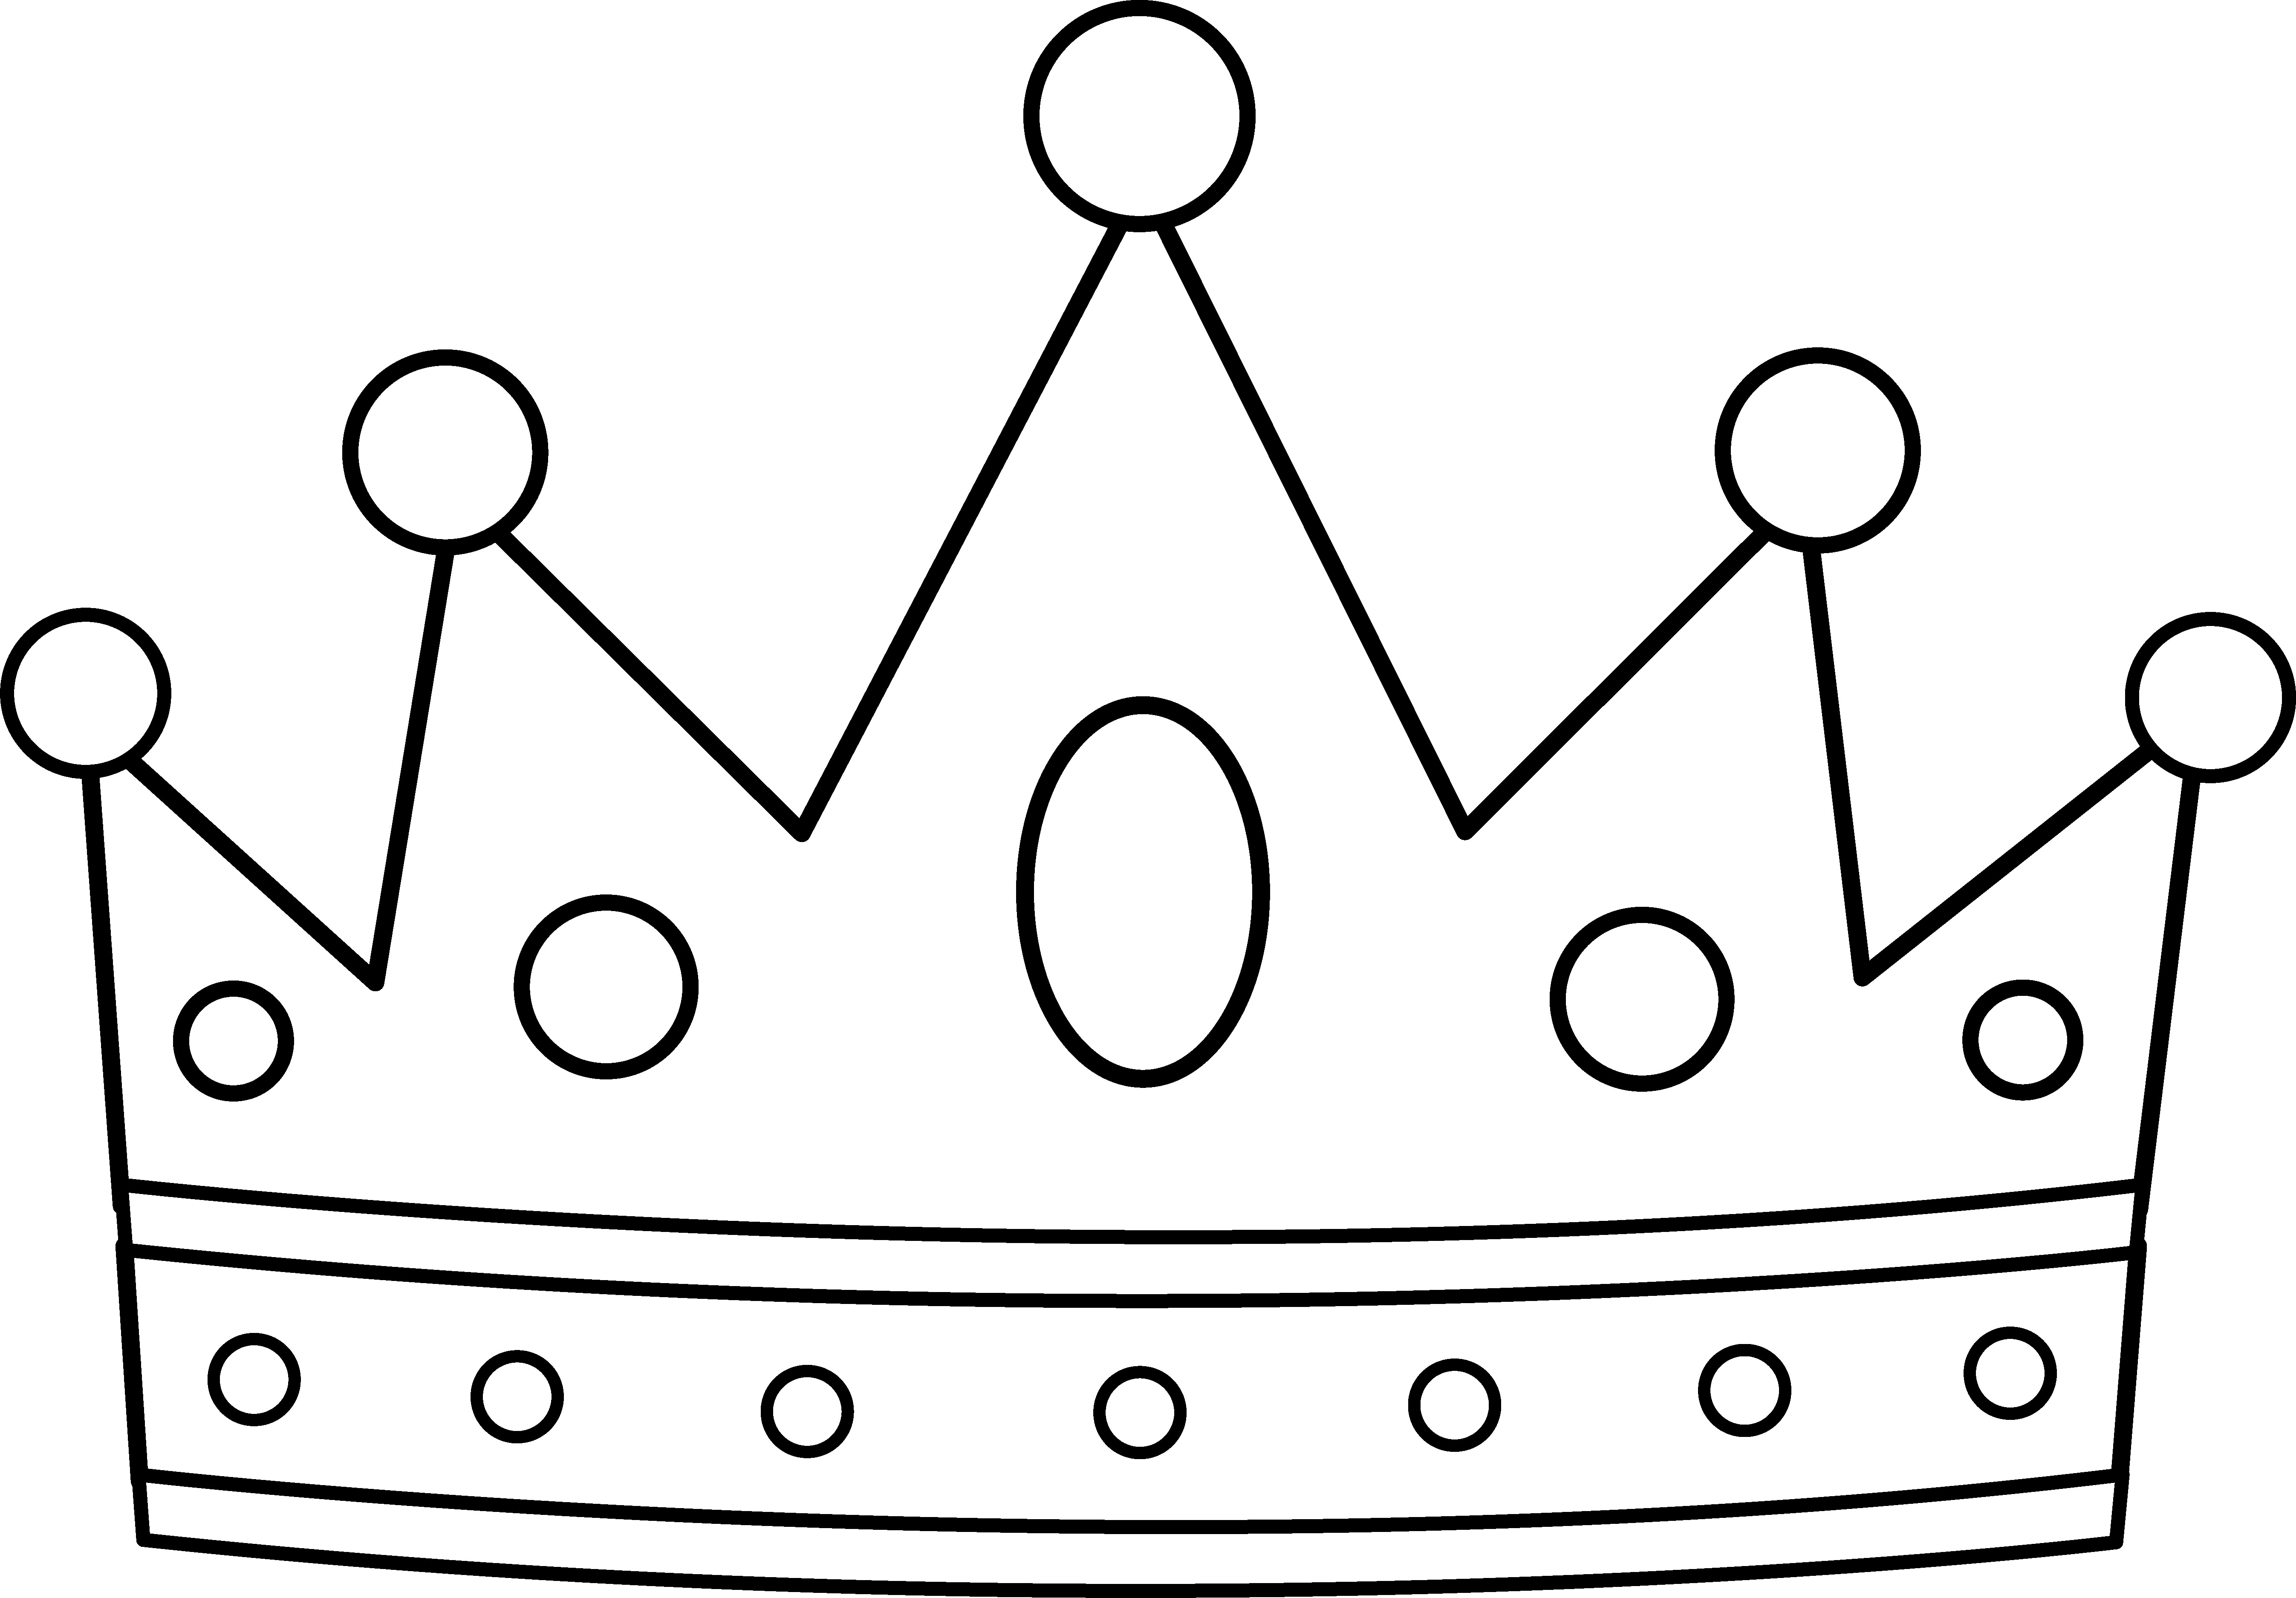 Princess Crown Coloring Pages 54 with Princess Crown Coloring Pages